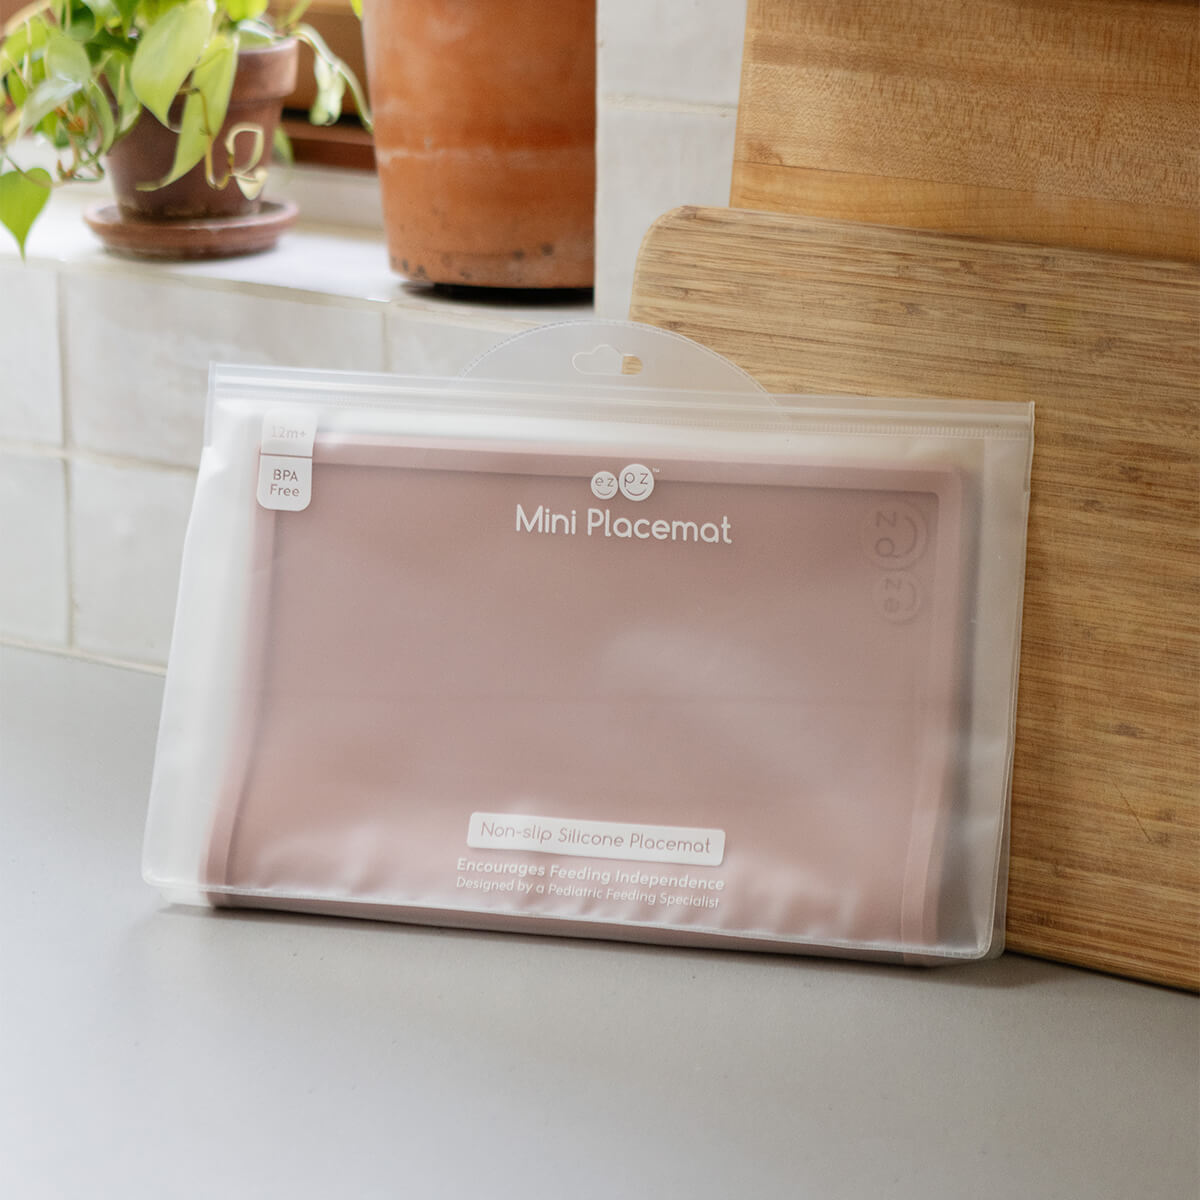 ezpz Mini Placemat in Blush Pink is a silicone placemat for toddlers that grips to the table